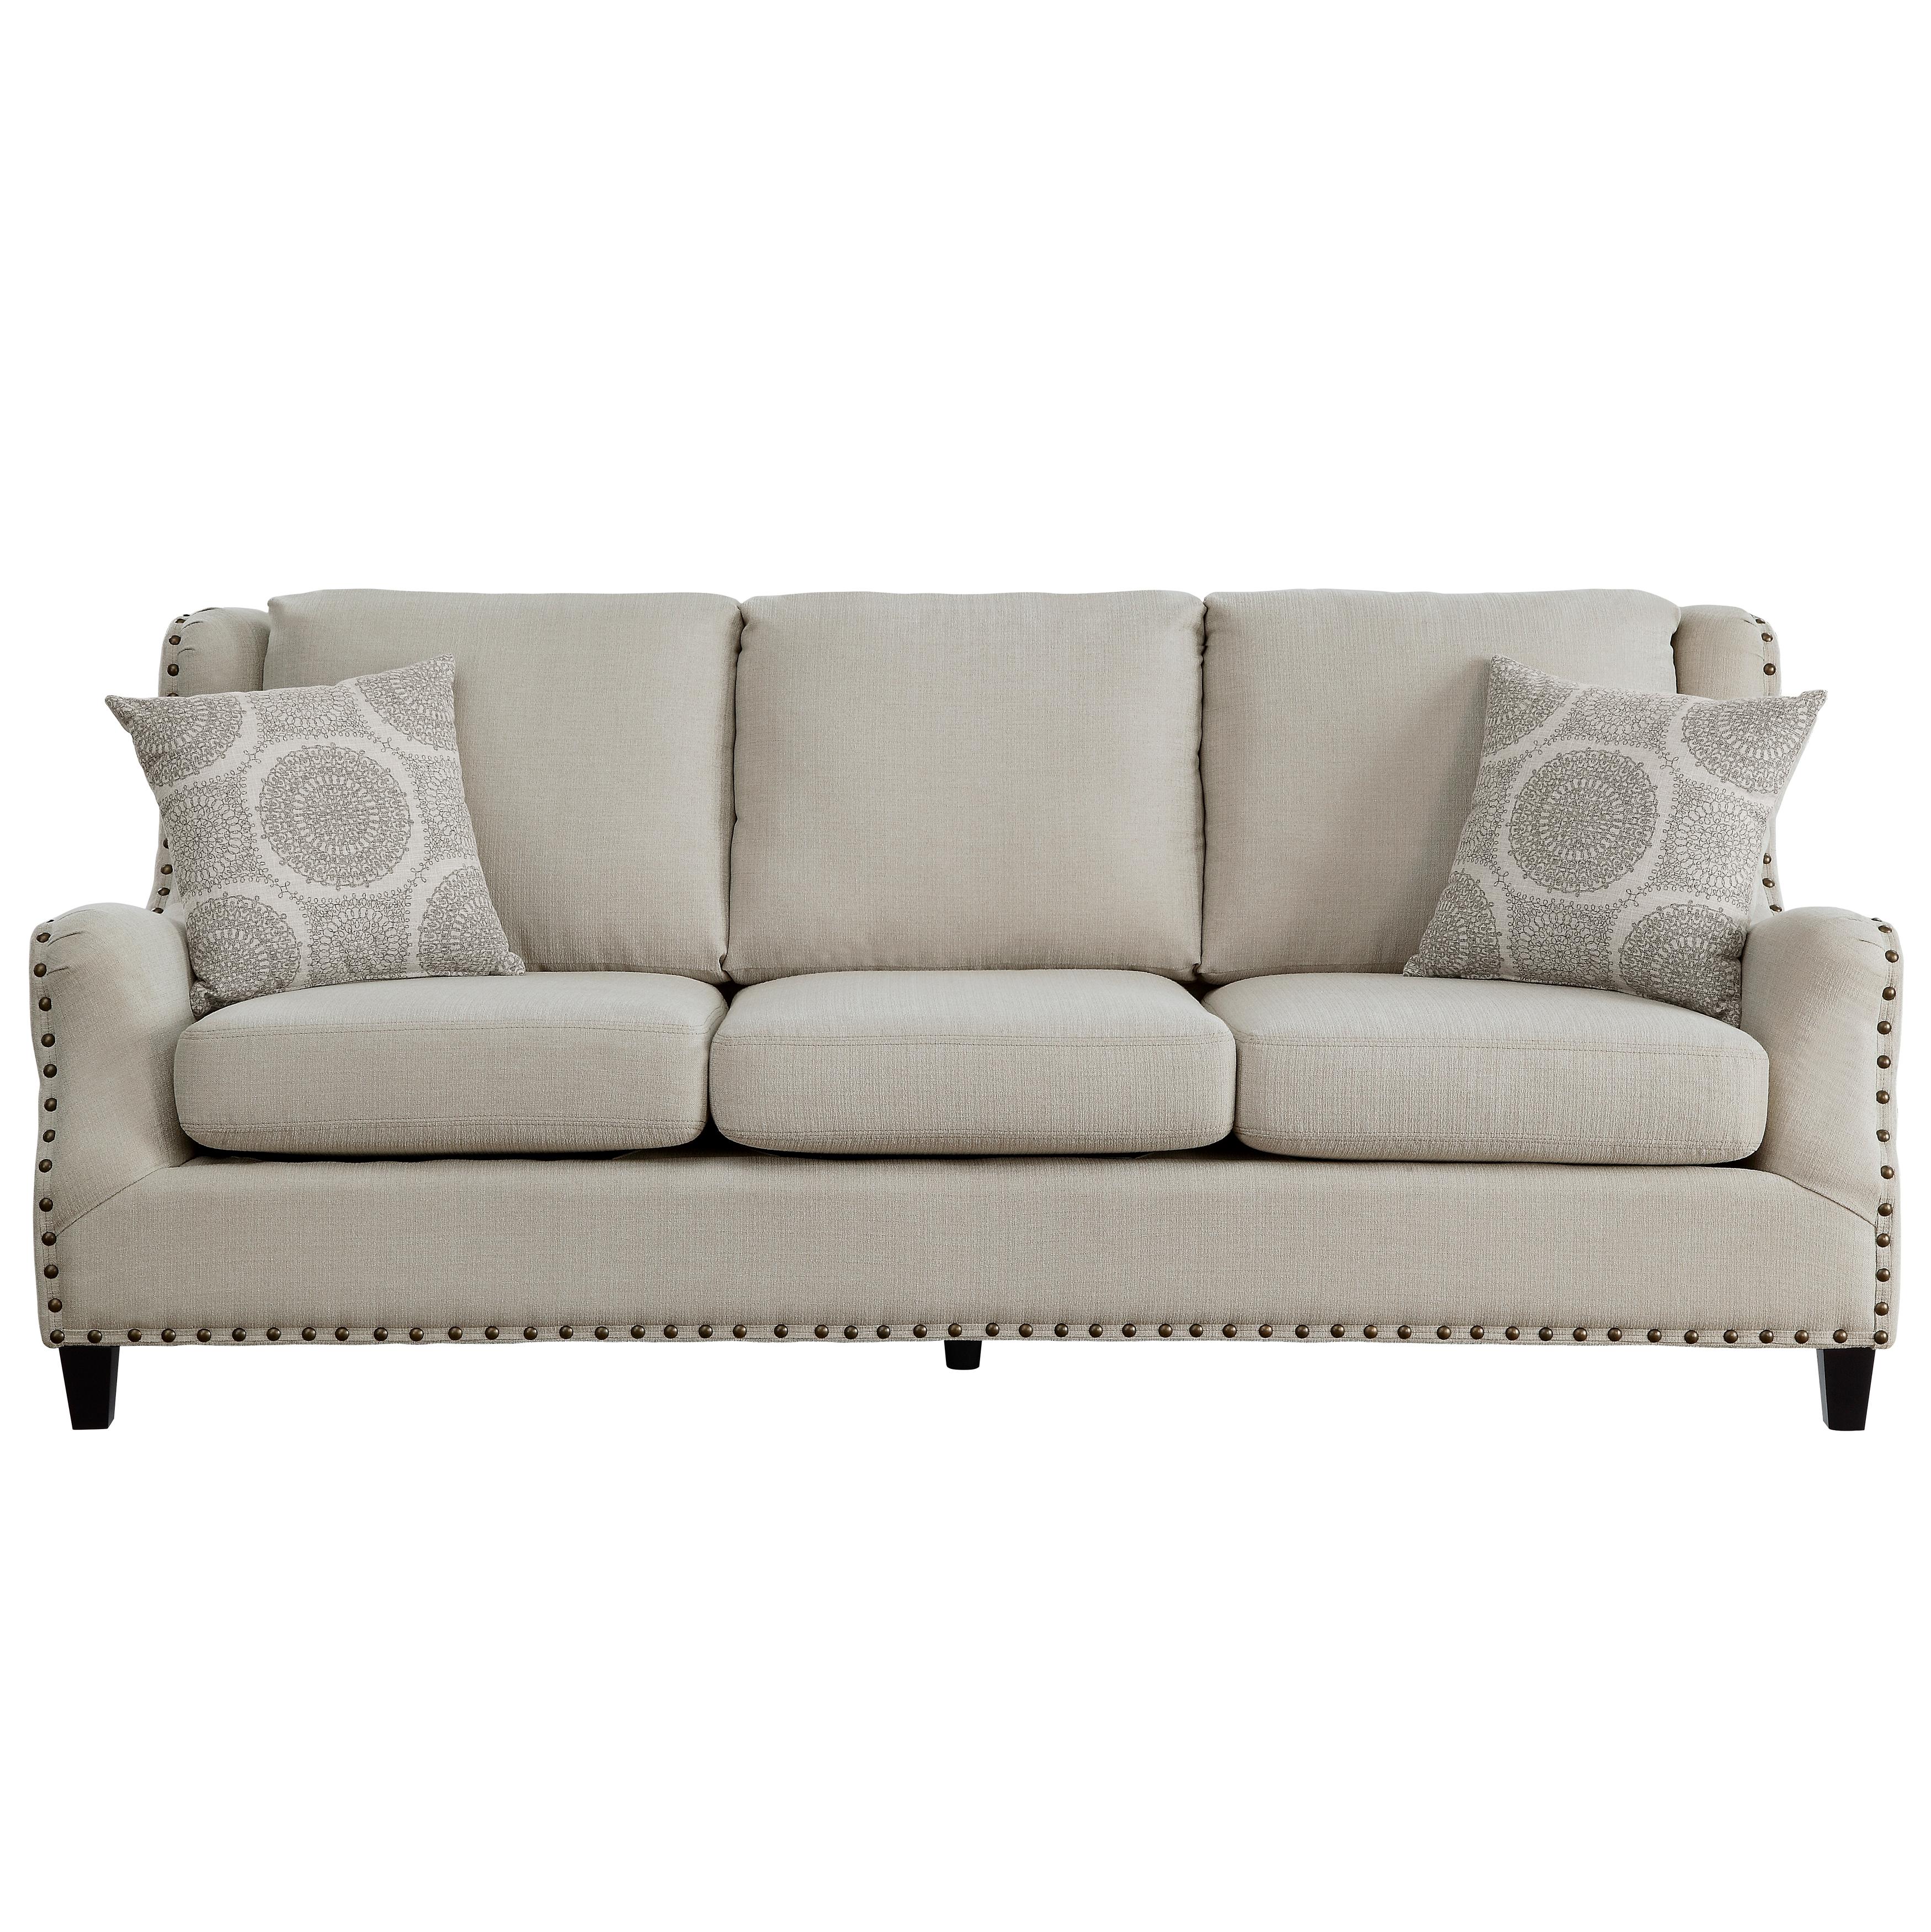 Traditional Sofa 9339BE-3 Halton 9339BE-3 in Beige 